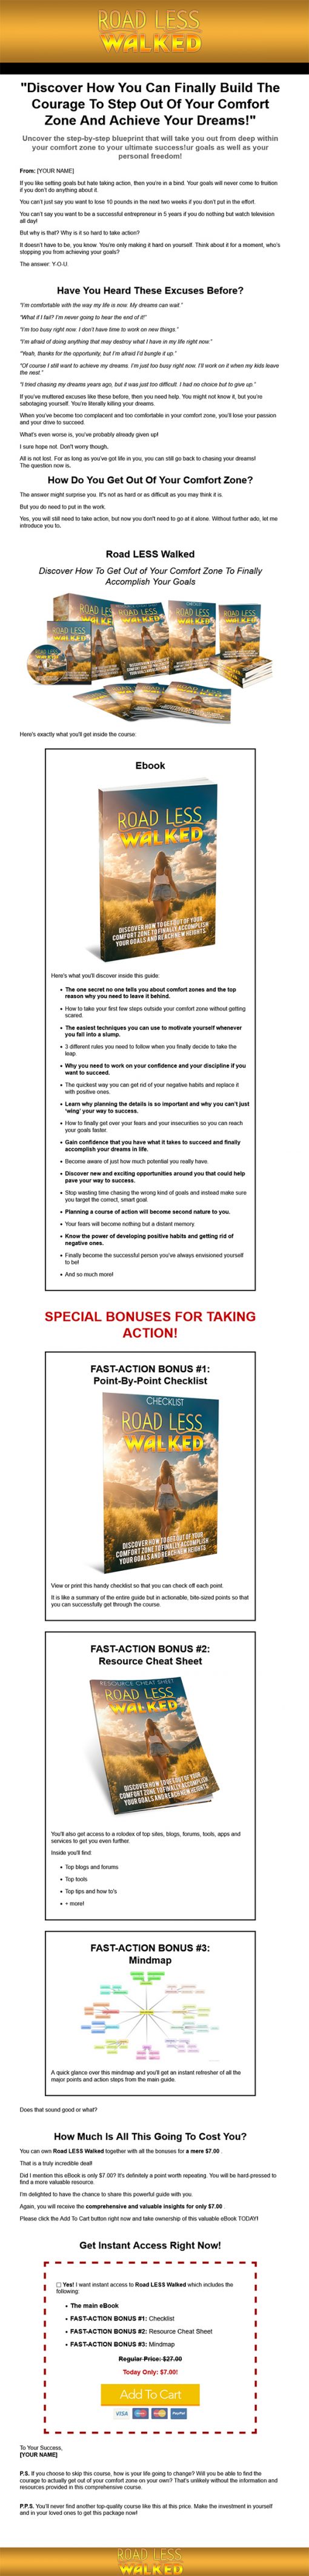 Road Less Walked Goal Setting Ebook and Videos MRR